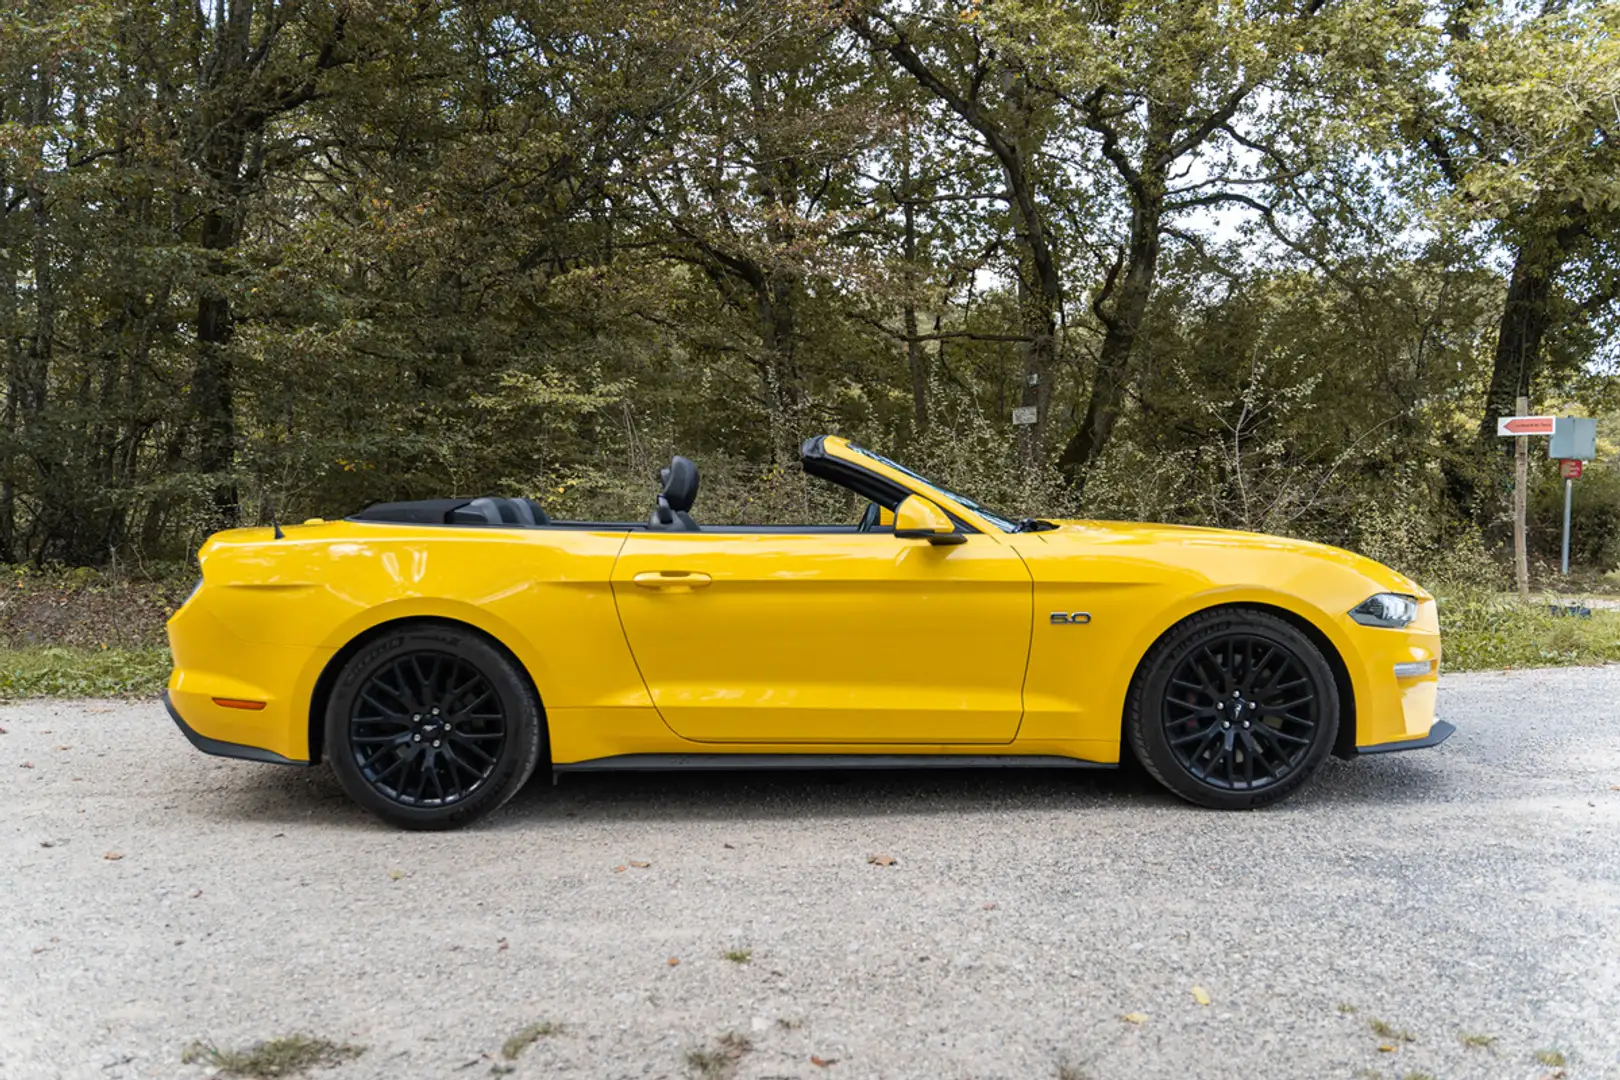 Ford Mustang Cabriolet V8 5.0 450 ch - 12 900km - 2018 - Immat  Jaune - 2